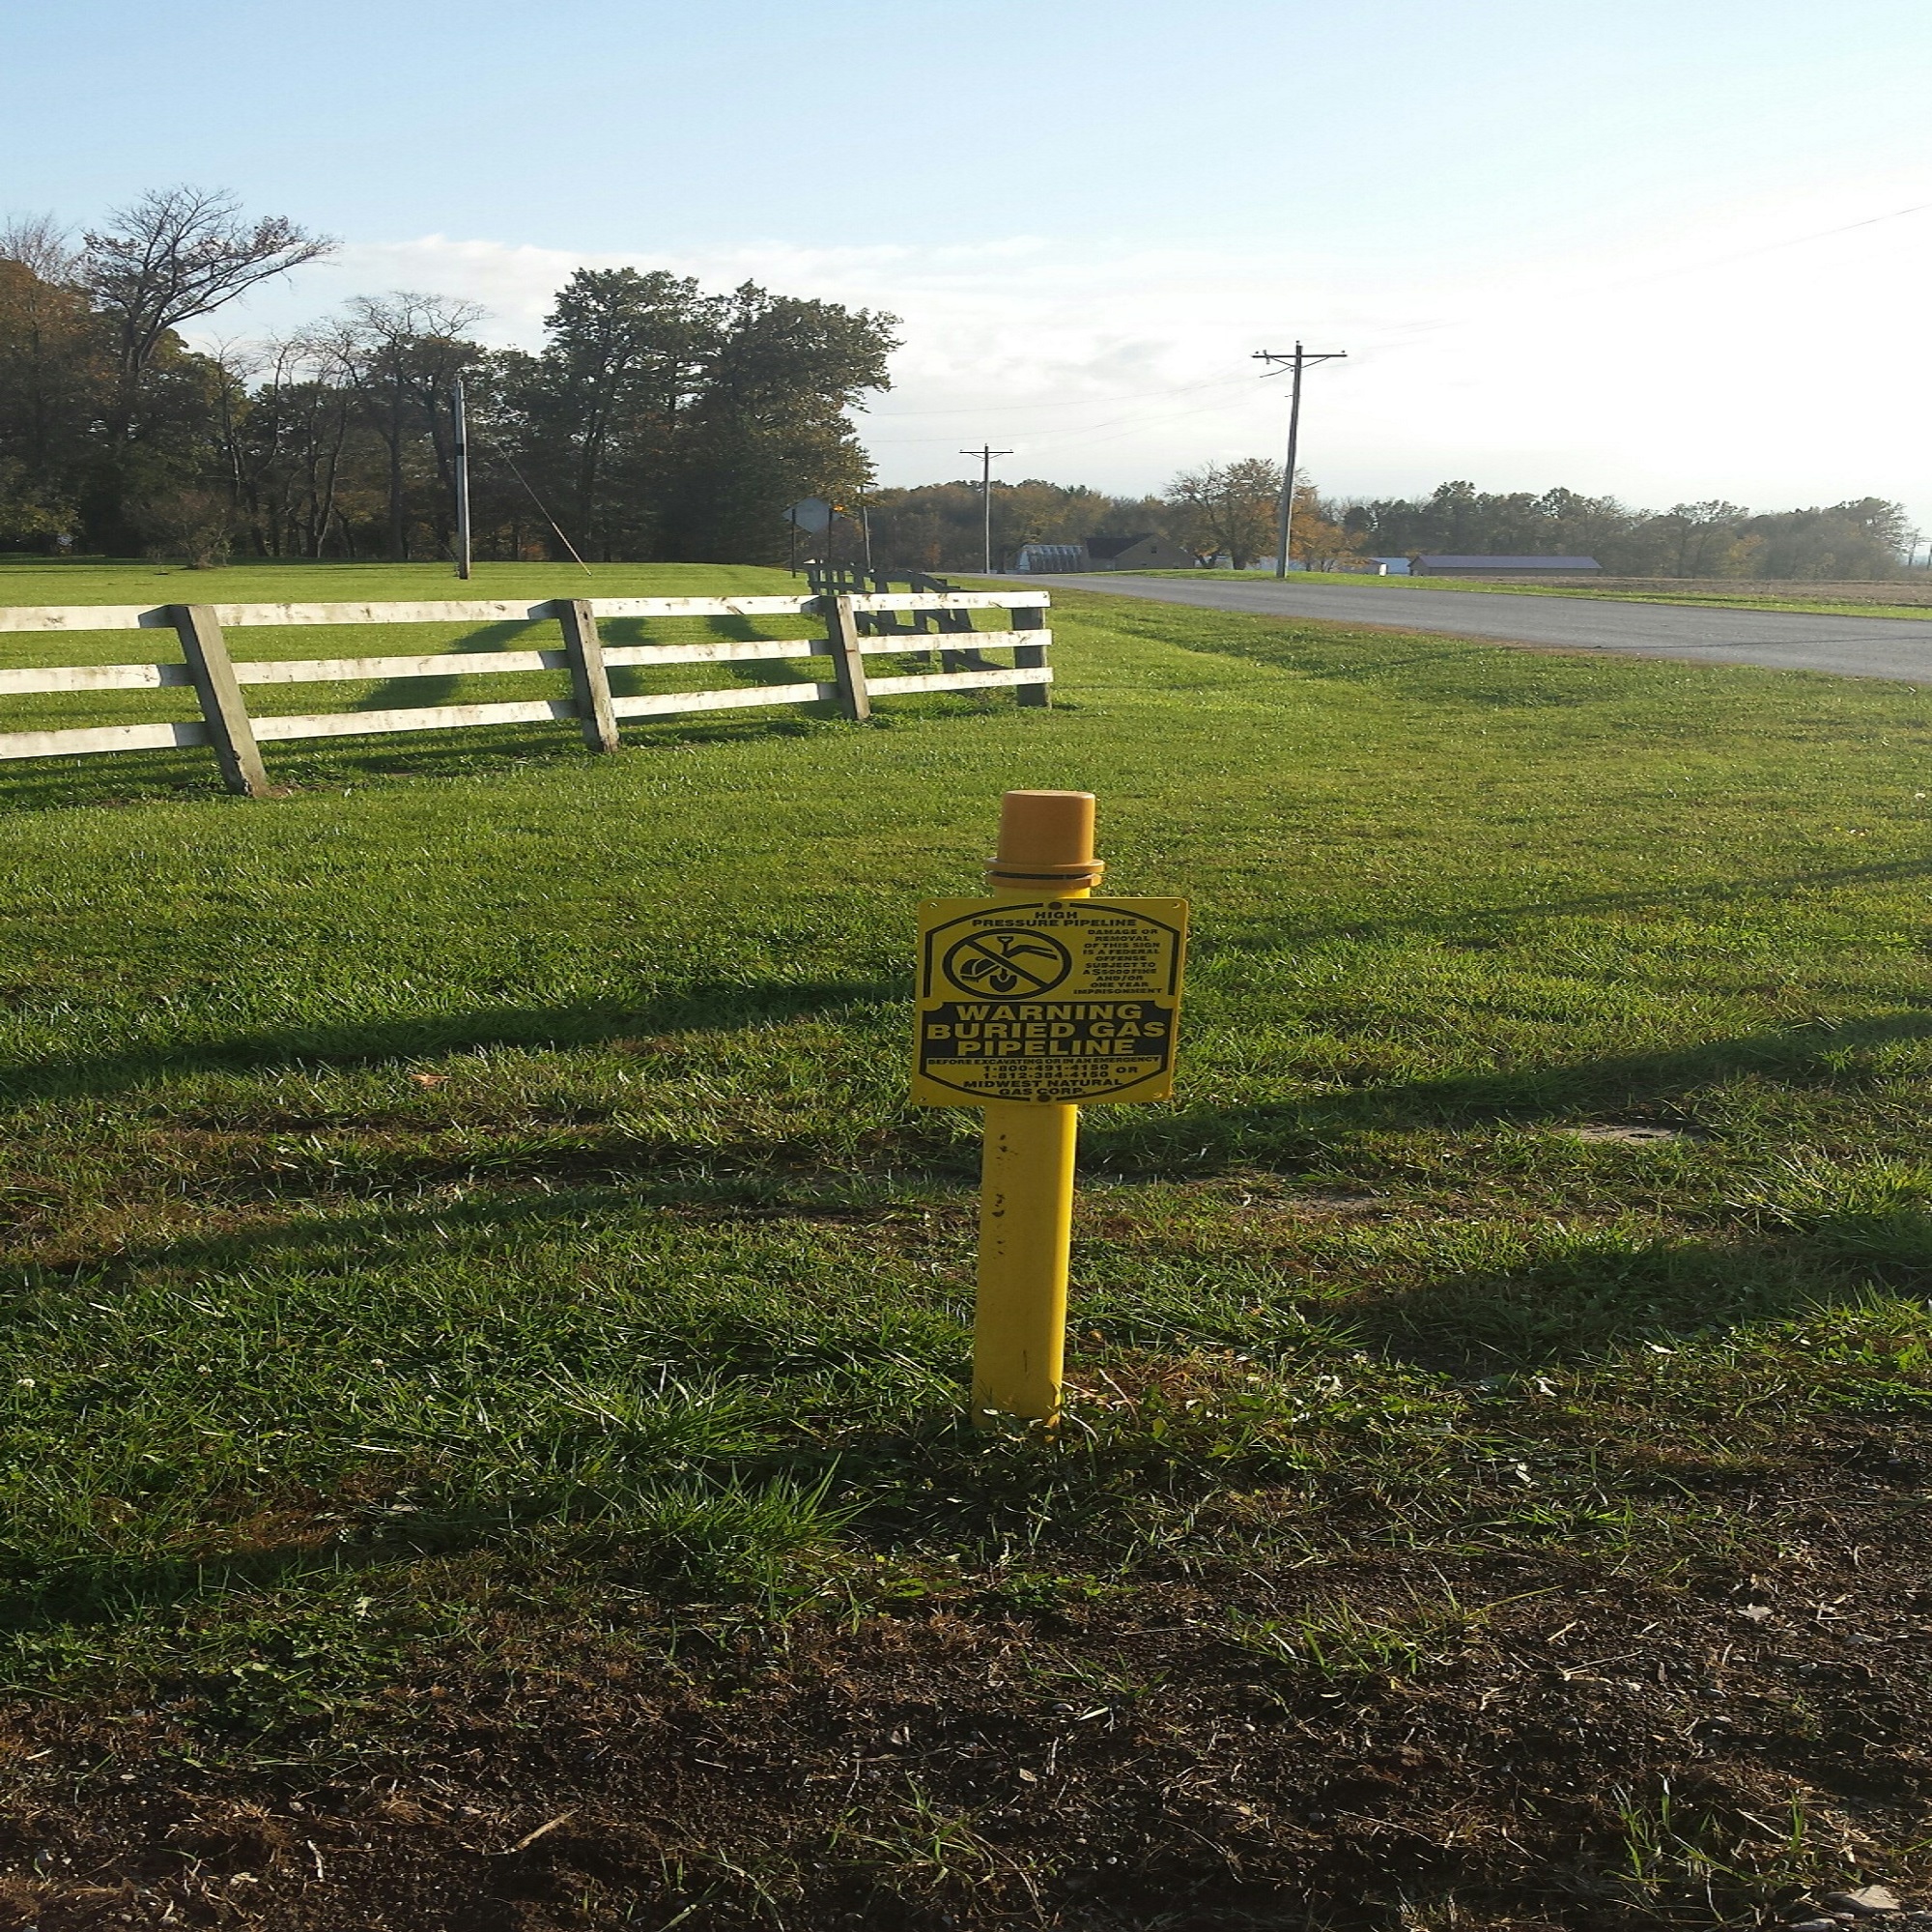 Marker Post -Test Station with Everlast sign for Midwest Gas